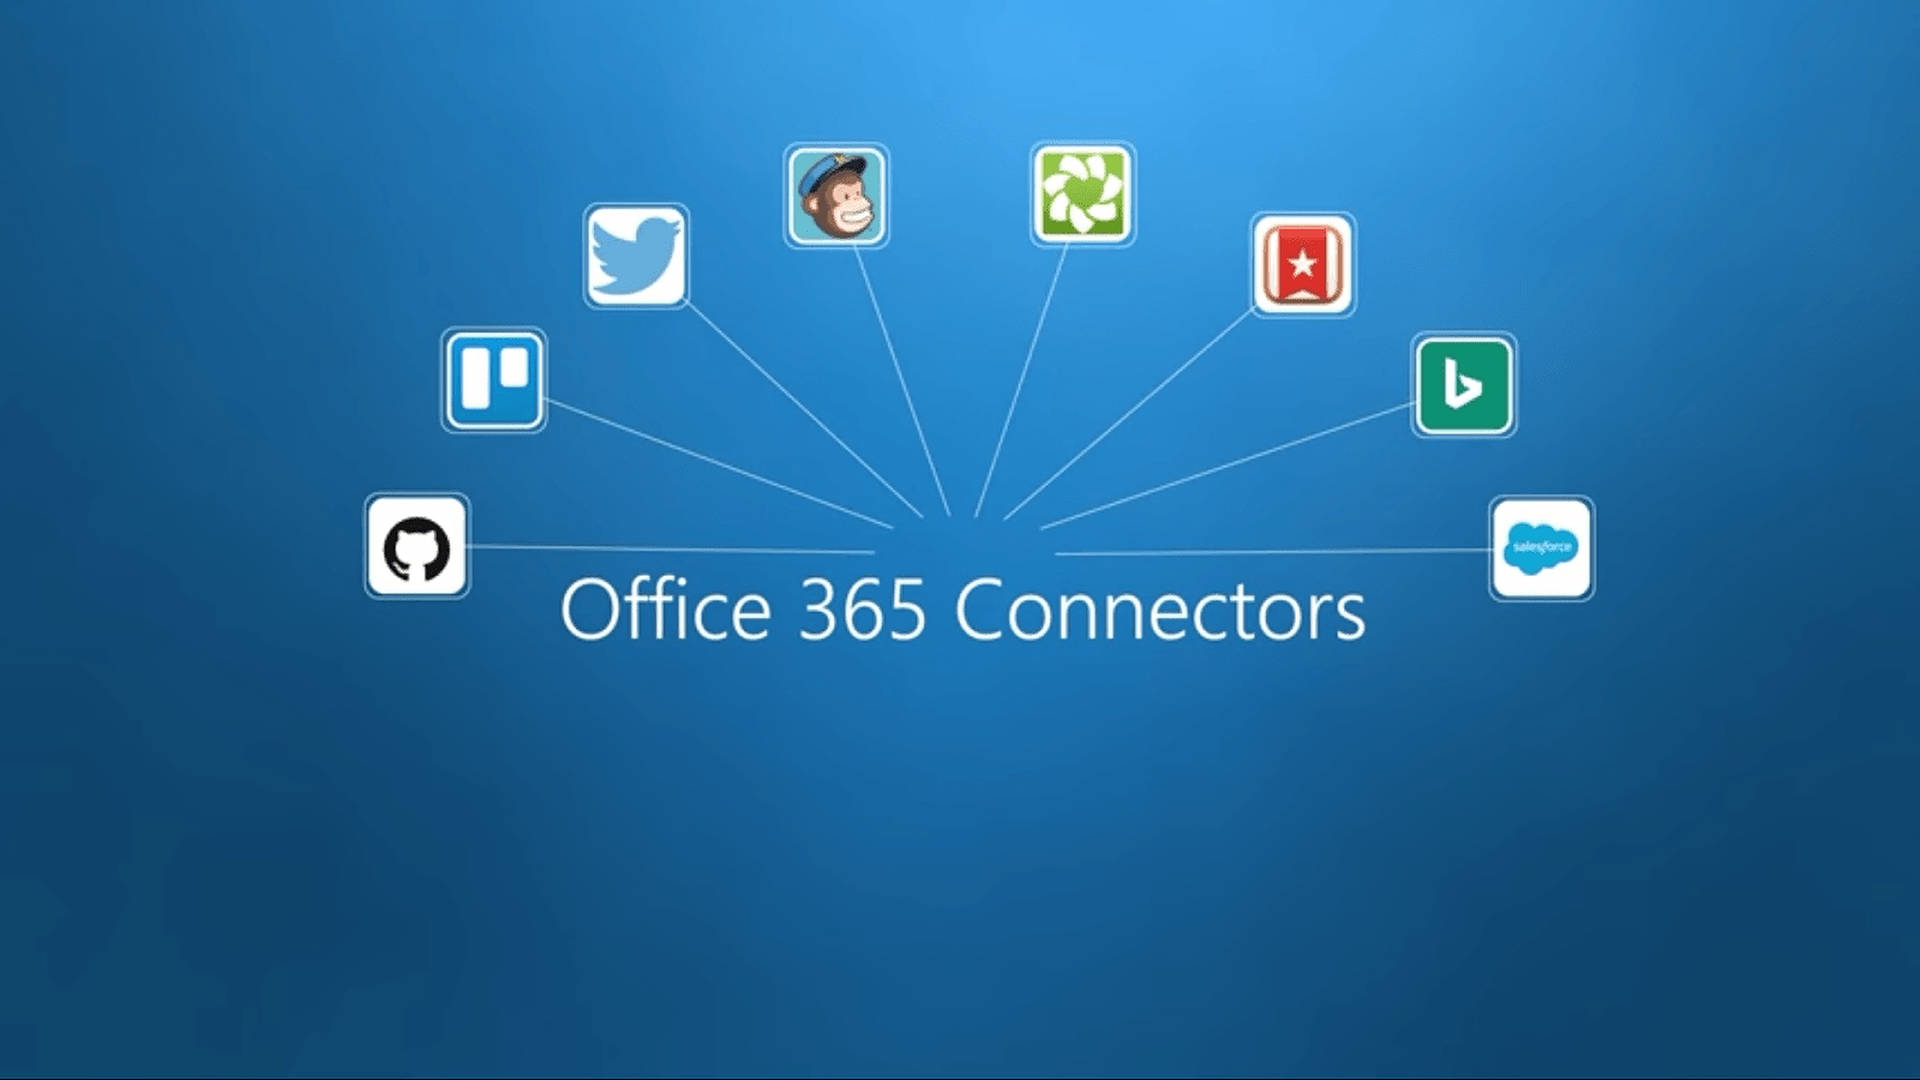 Office 365 Connectors Background